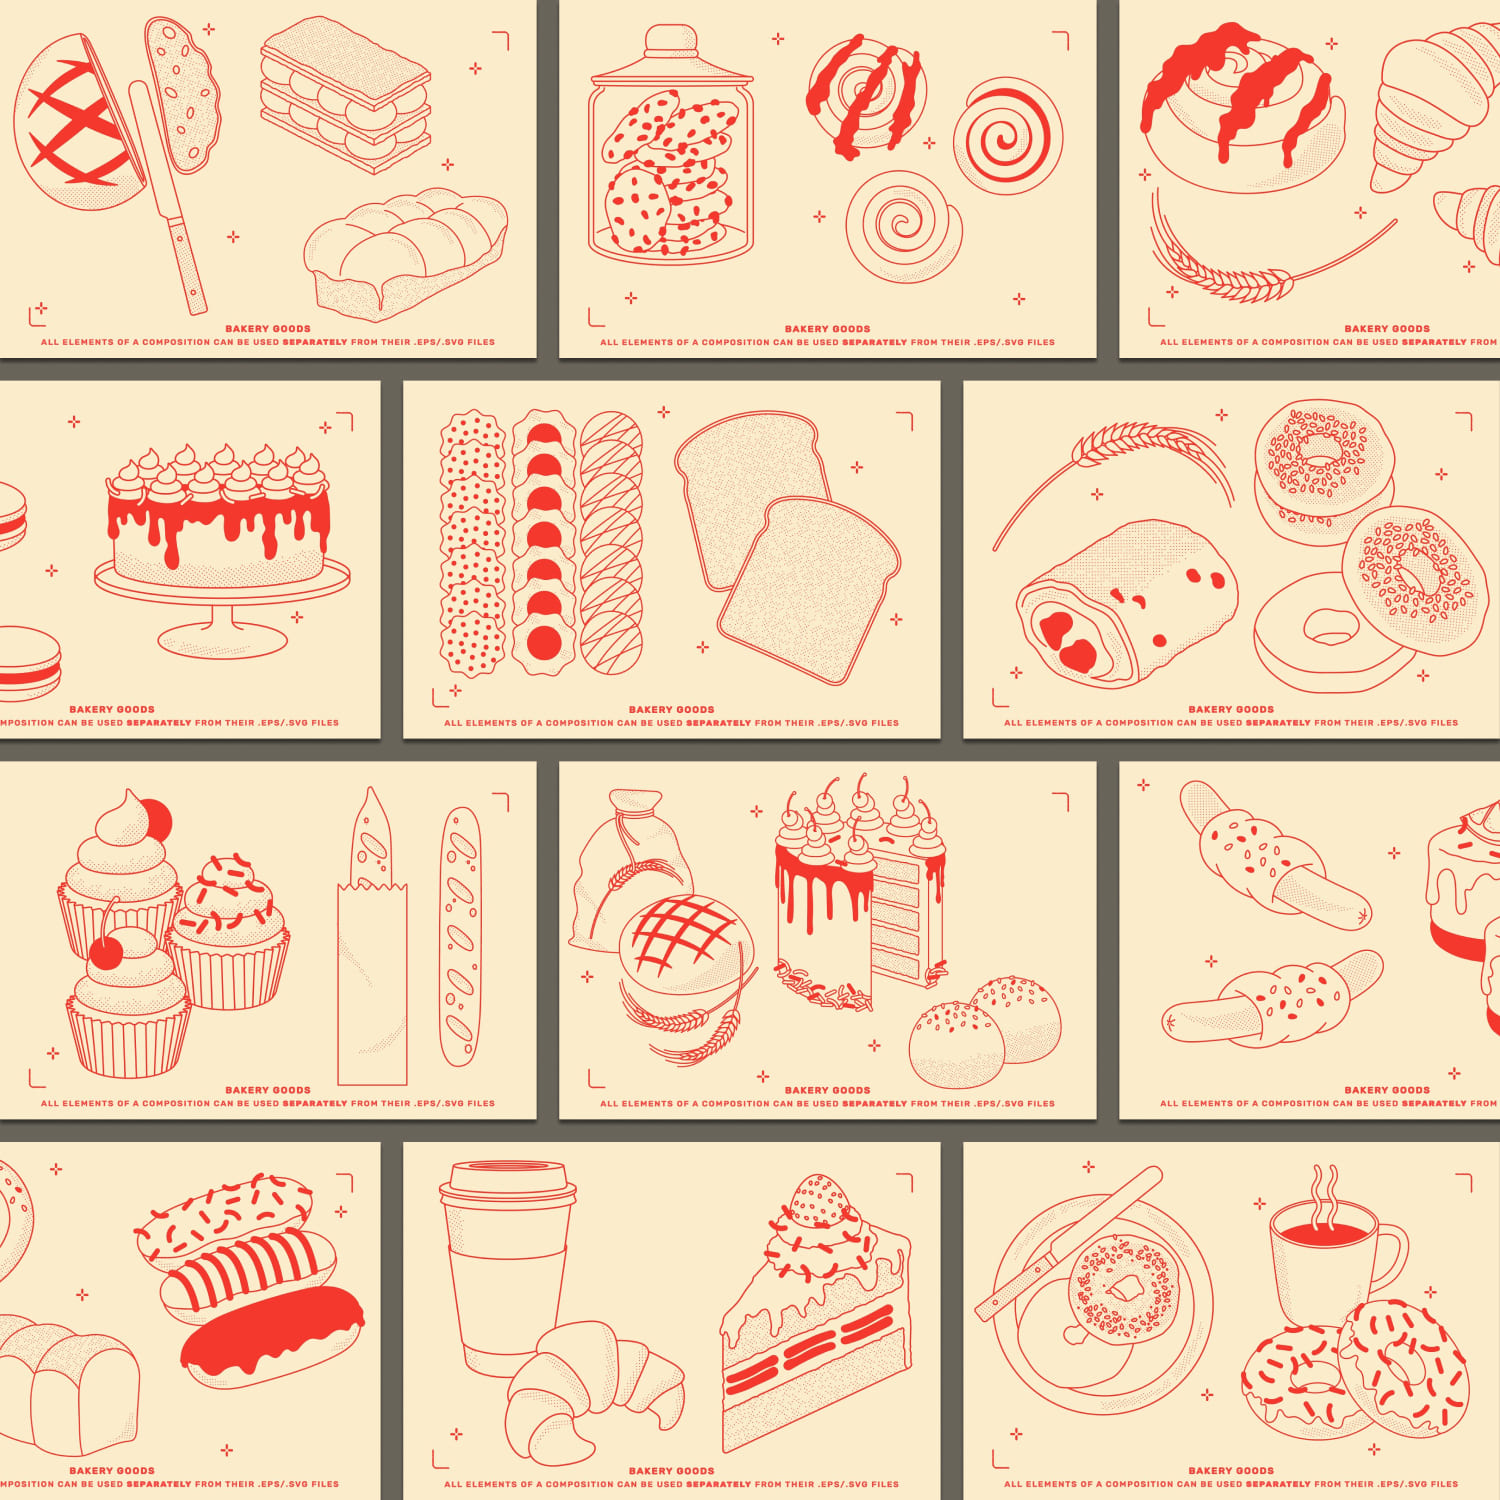 Bakery Vector Illustrations created by GemPortella.